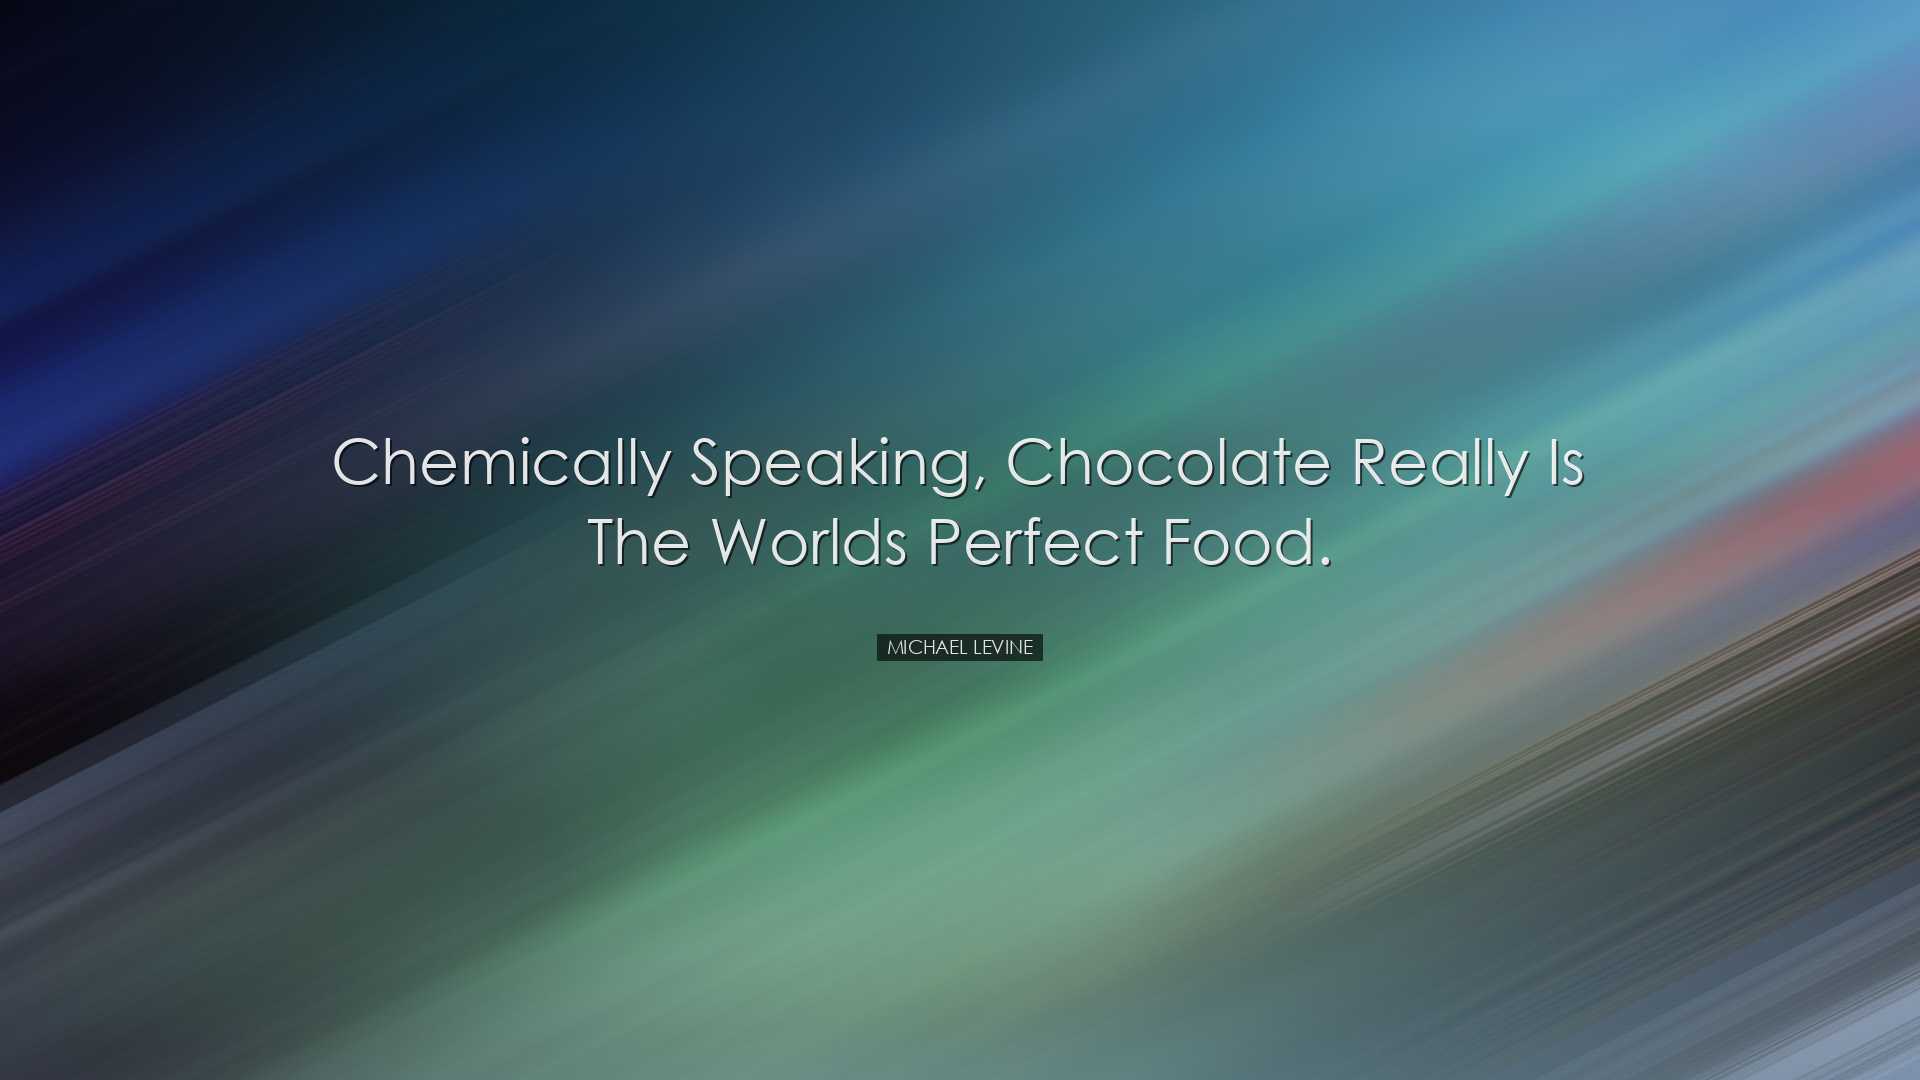 Chemically speaking, chocolate really is the worlds perfect food.